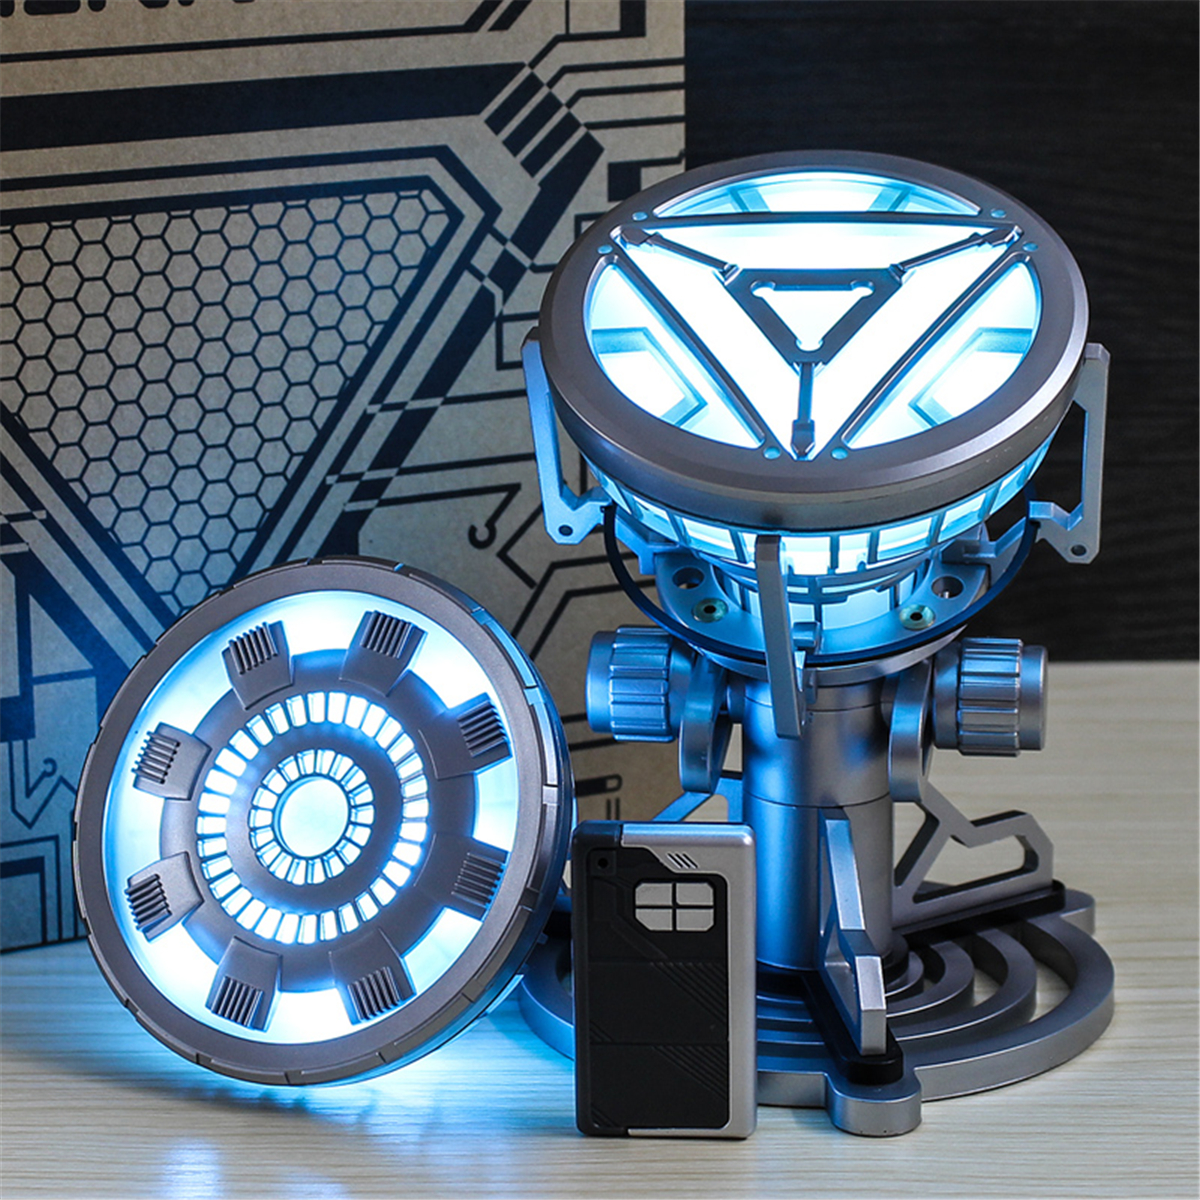 1:1 ARC REACTOR LED Chest Heart Light-up Lamp Movie ABC Props Model Kit Science Toy 21